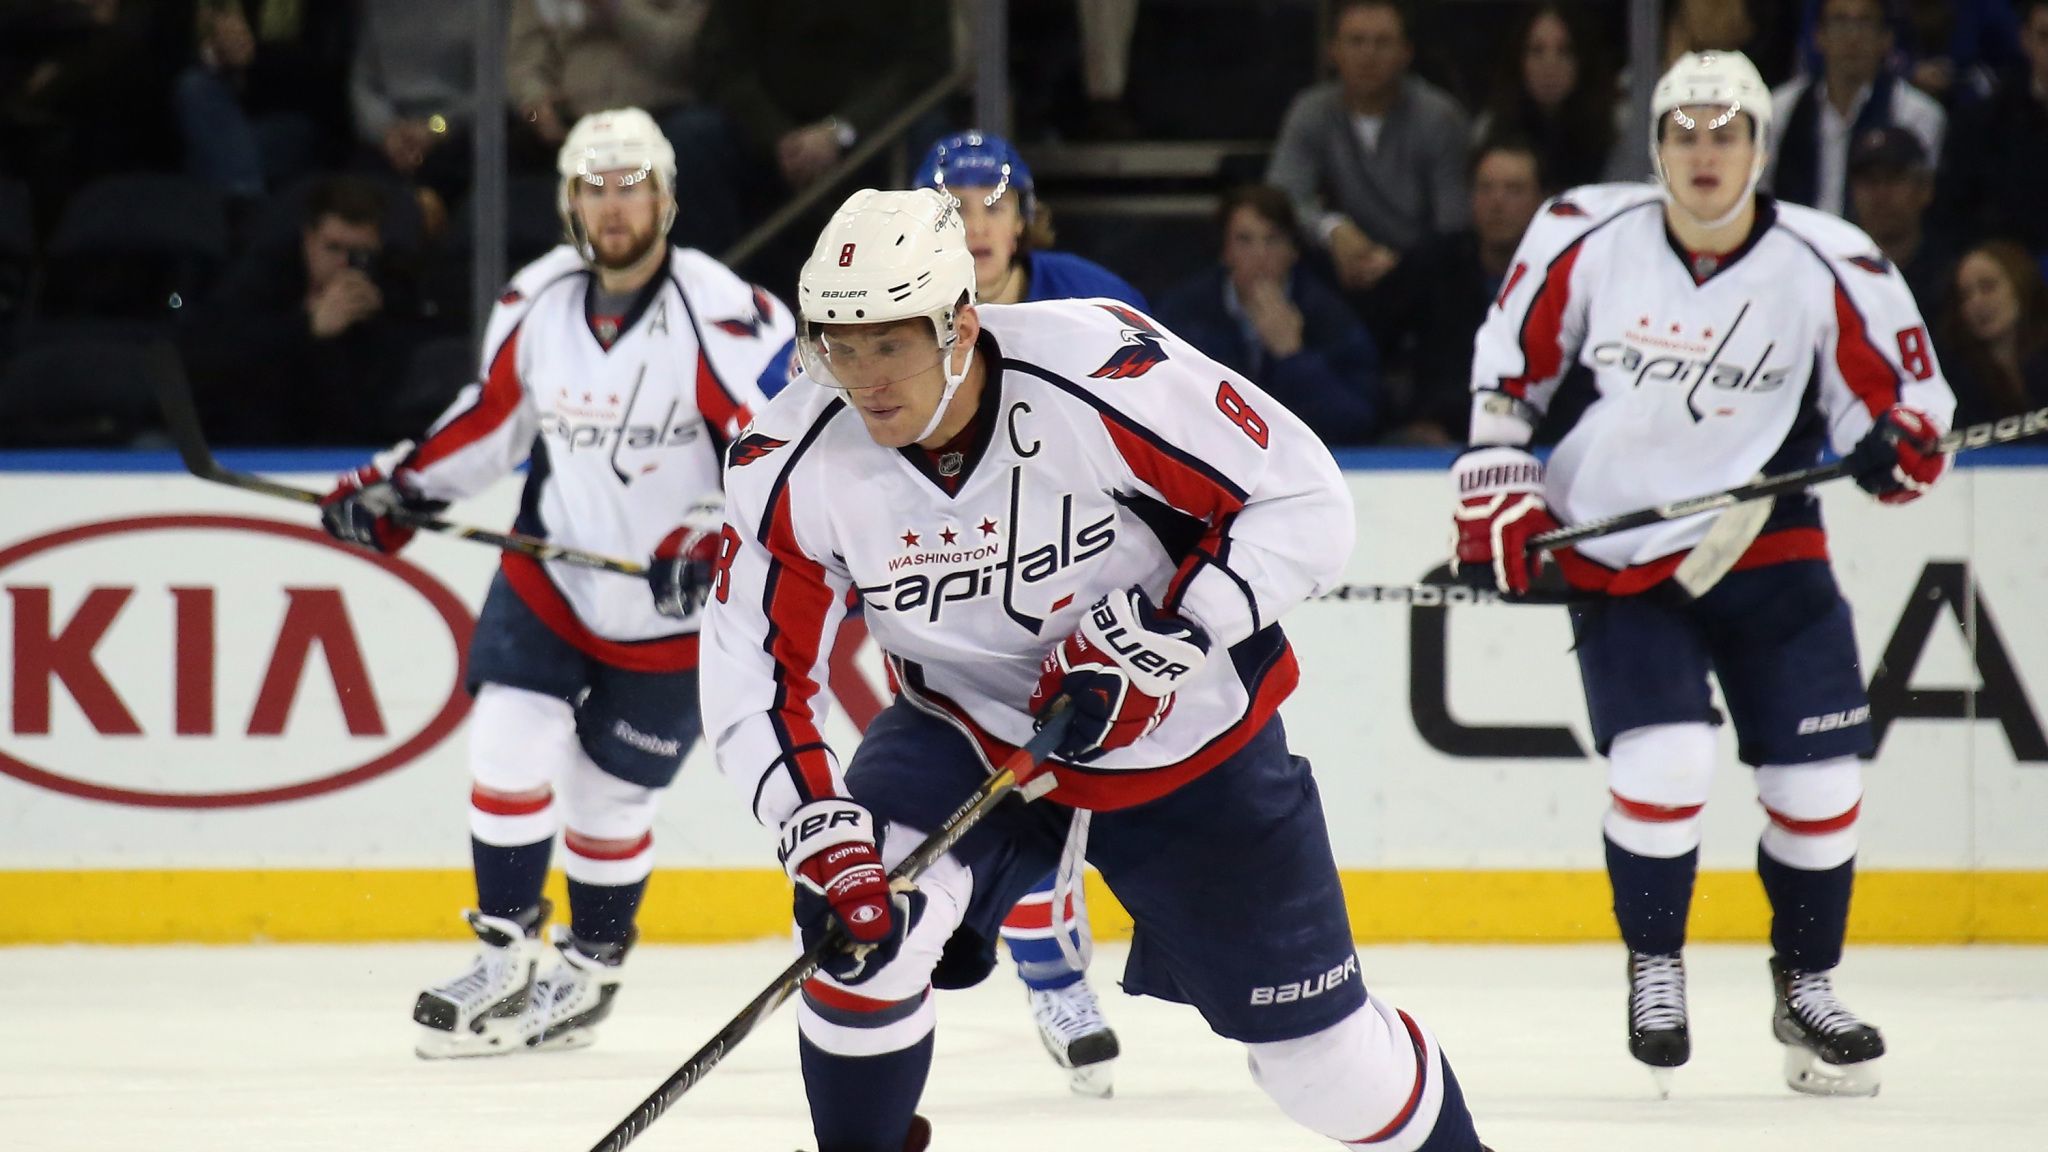 Alex Ovechkin has goal and assist, Capitals beat Lightning